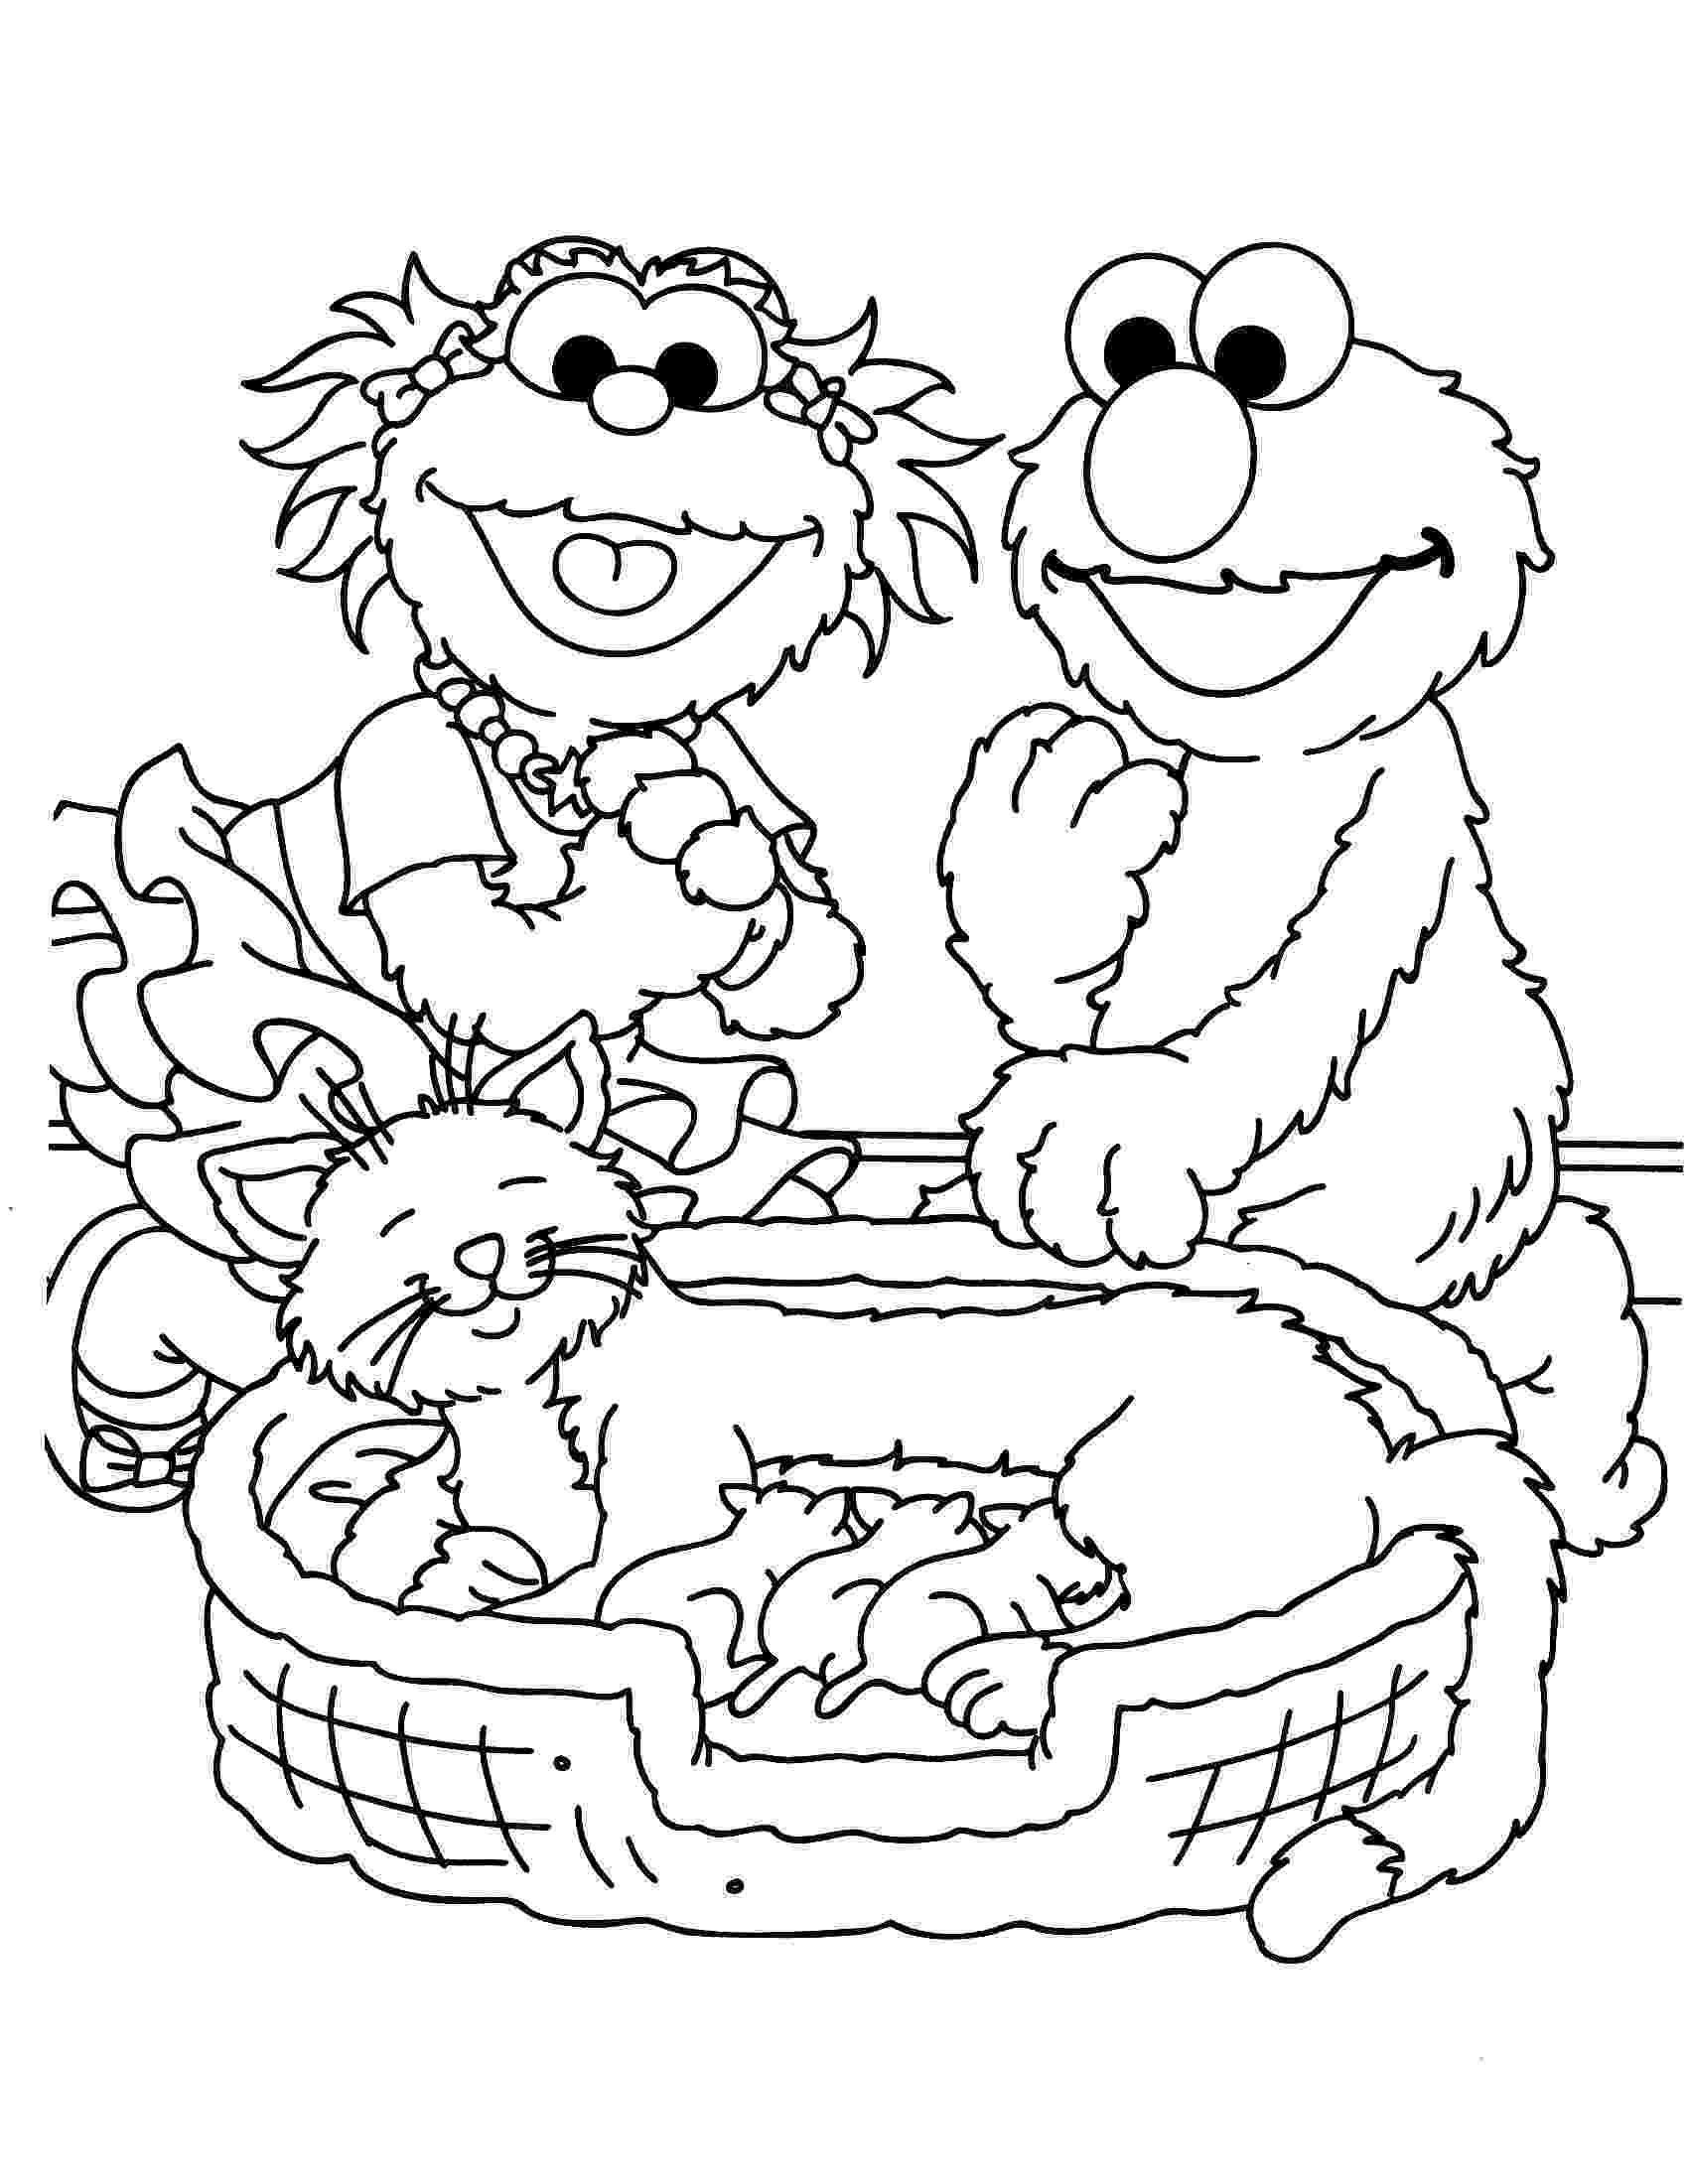 sesame street coloring pages sesame street charactor coloring sheets big bird sesame sesame street pages coloring 